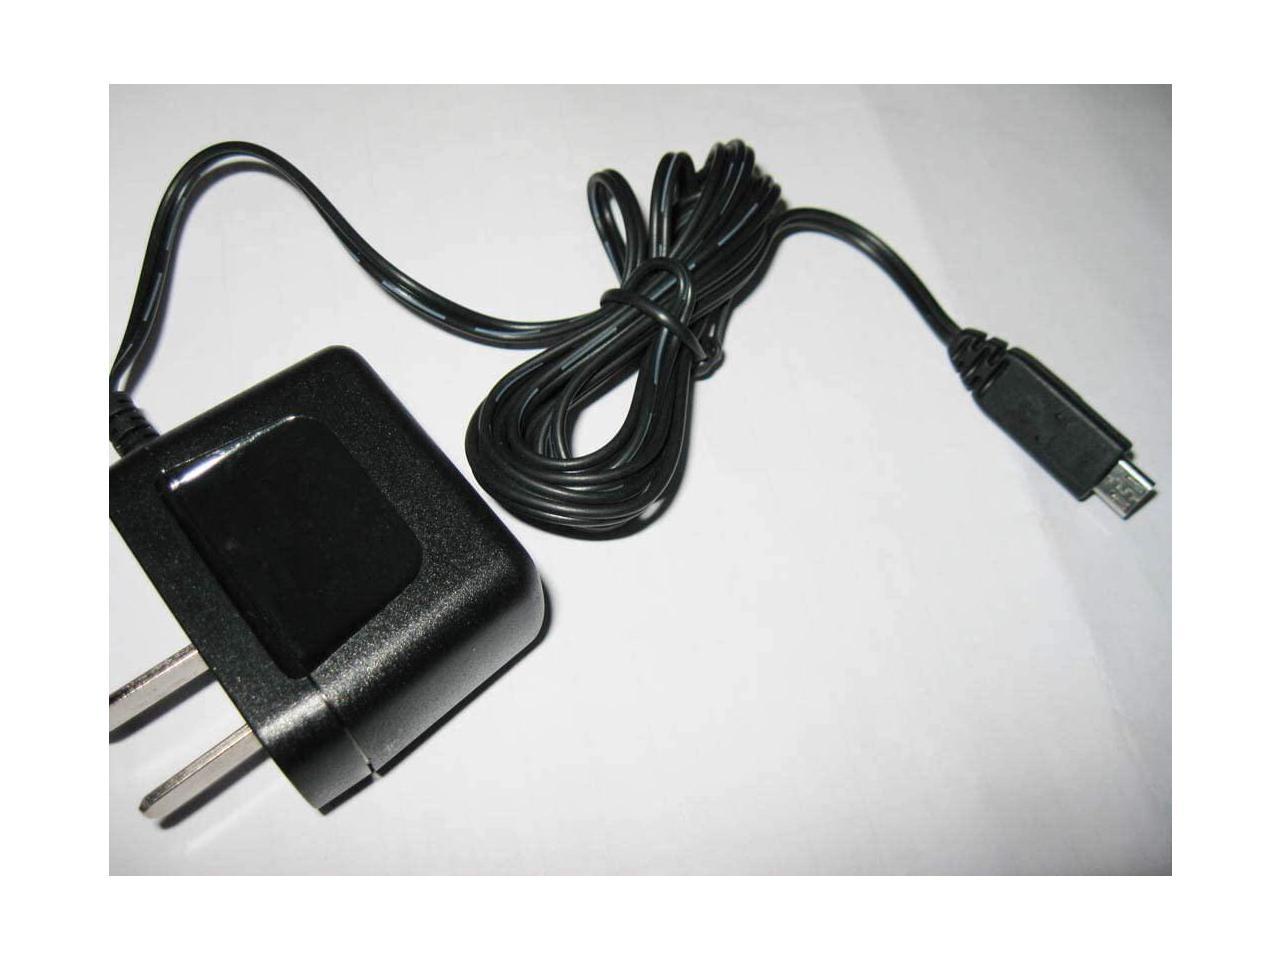 Wall Charger Direct BoxWave Charger for Garmin GPSMAP 86sc, Wall Plug Charger for Garmin GPSMAP 86sc 